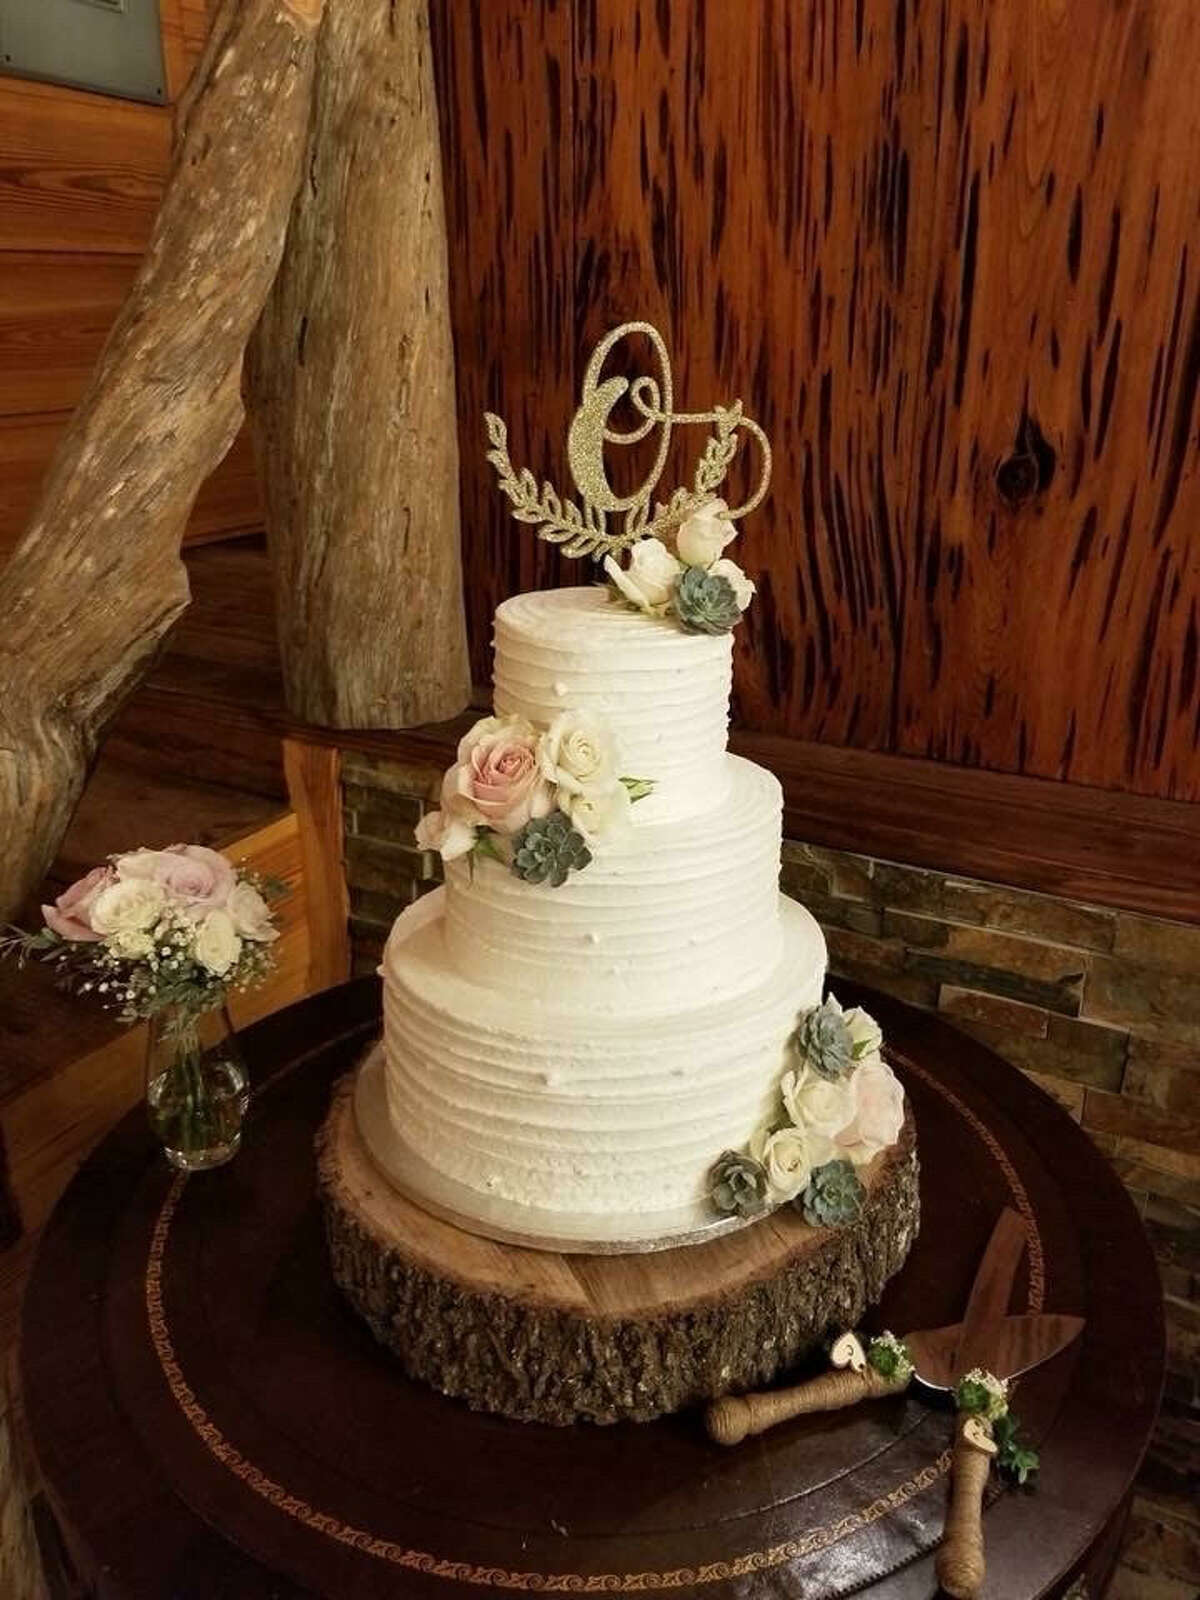 Although the pictured cake isn't the same one from Laura Fragoso Hiller's wedding, one of her followers shared her  Sam's Club wedding cake that looked "almost exactly" like Hiller's.